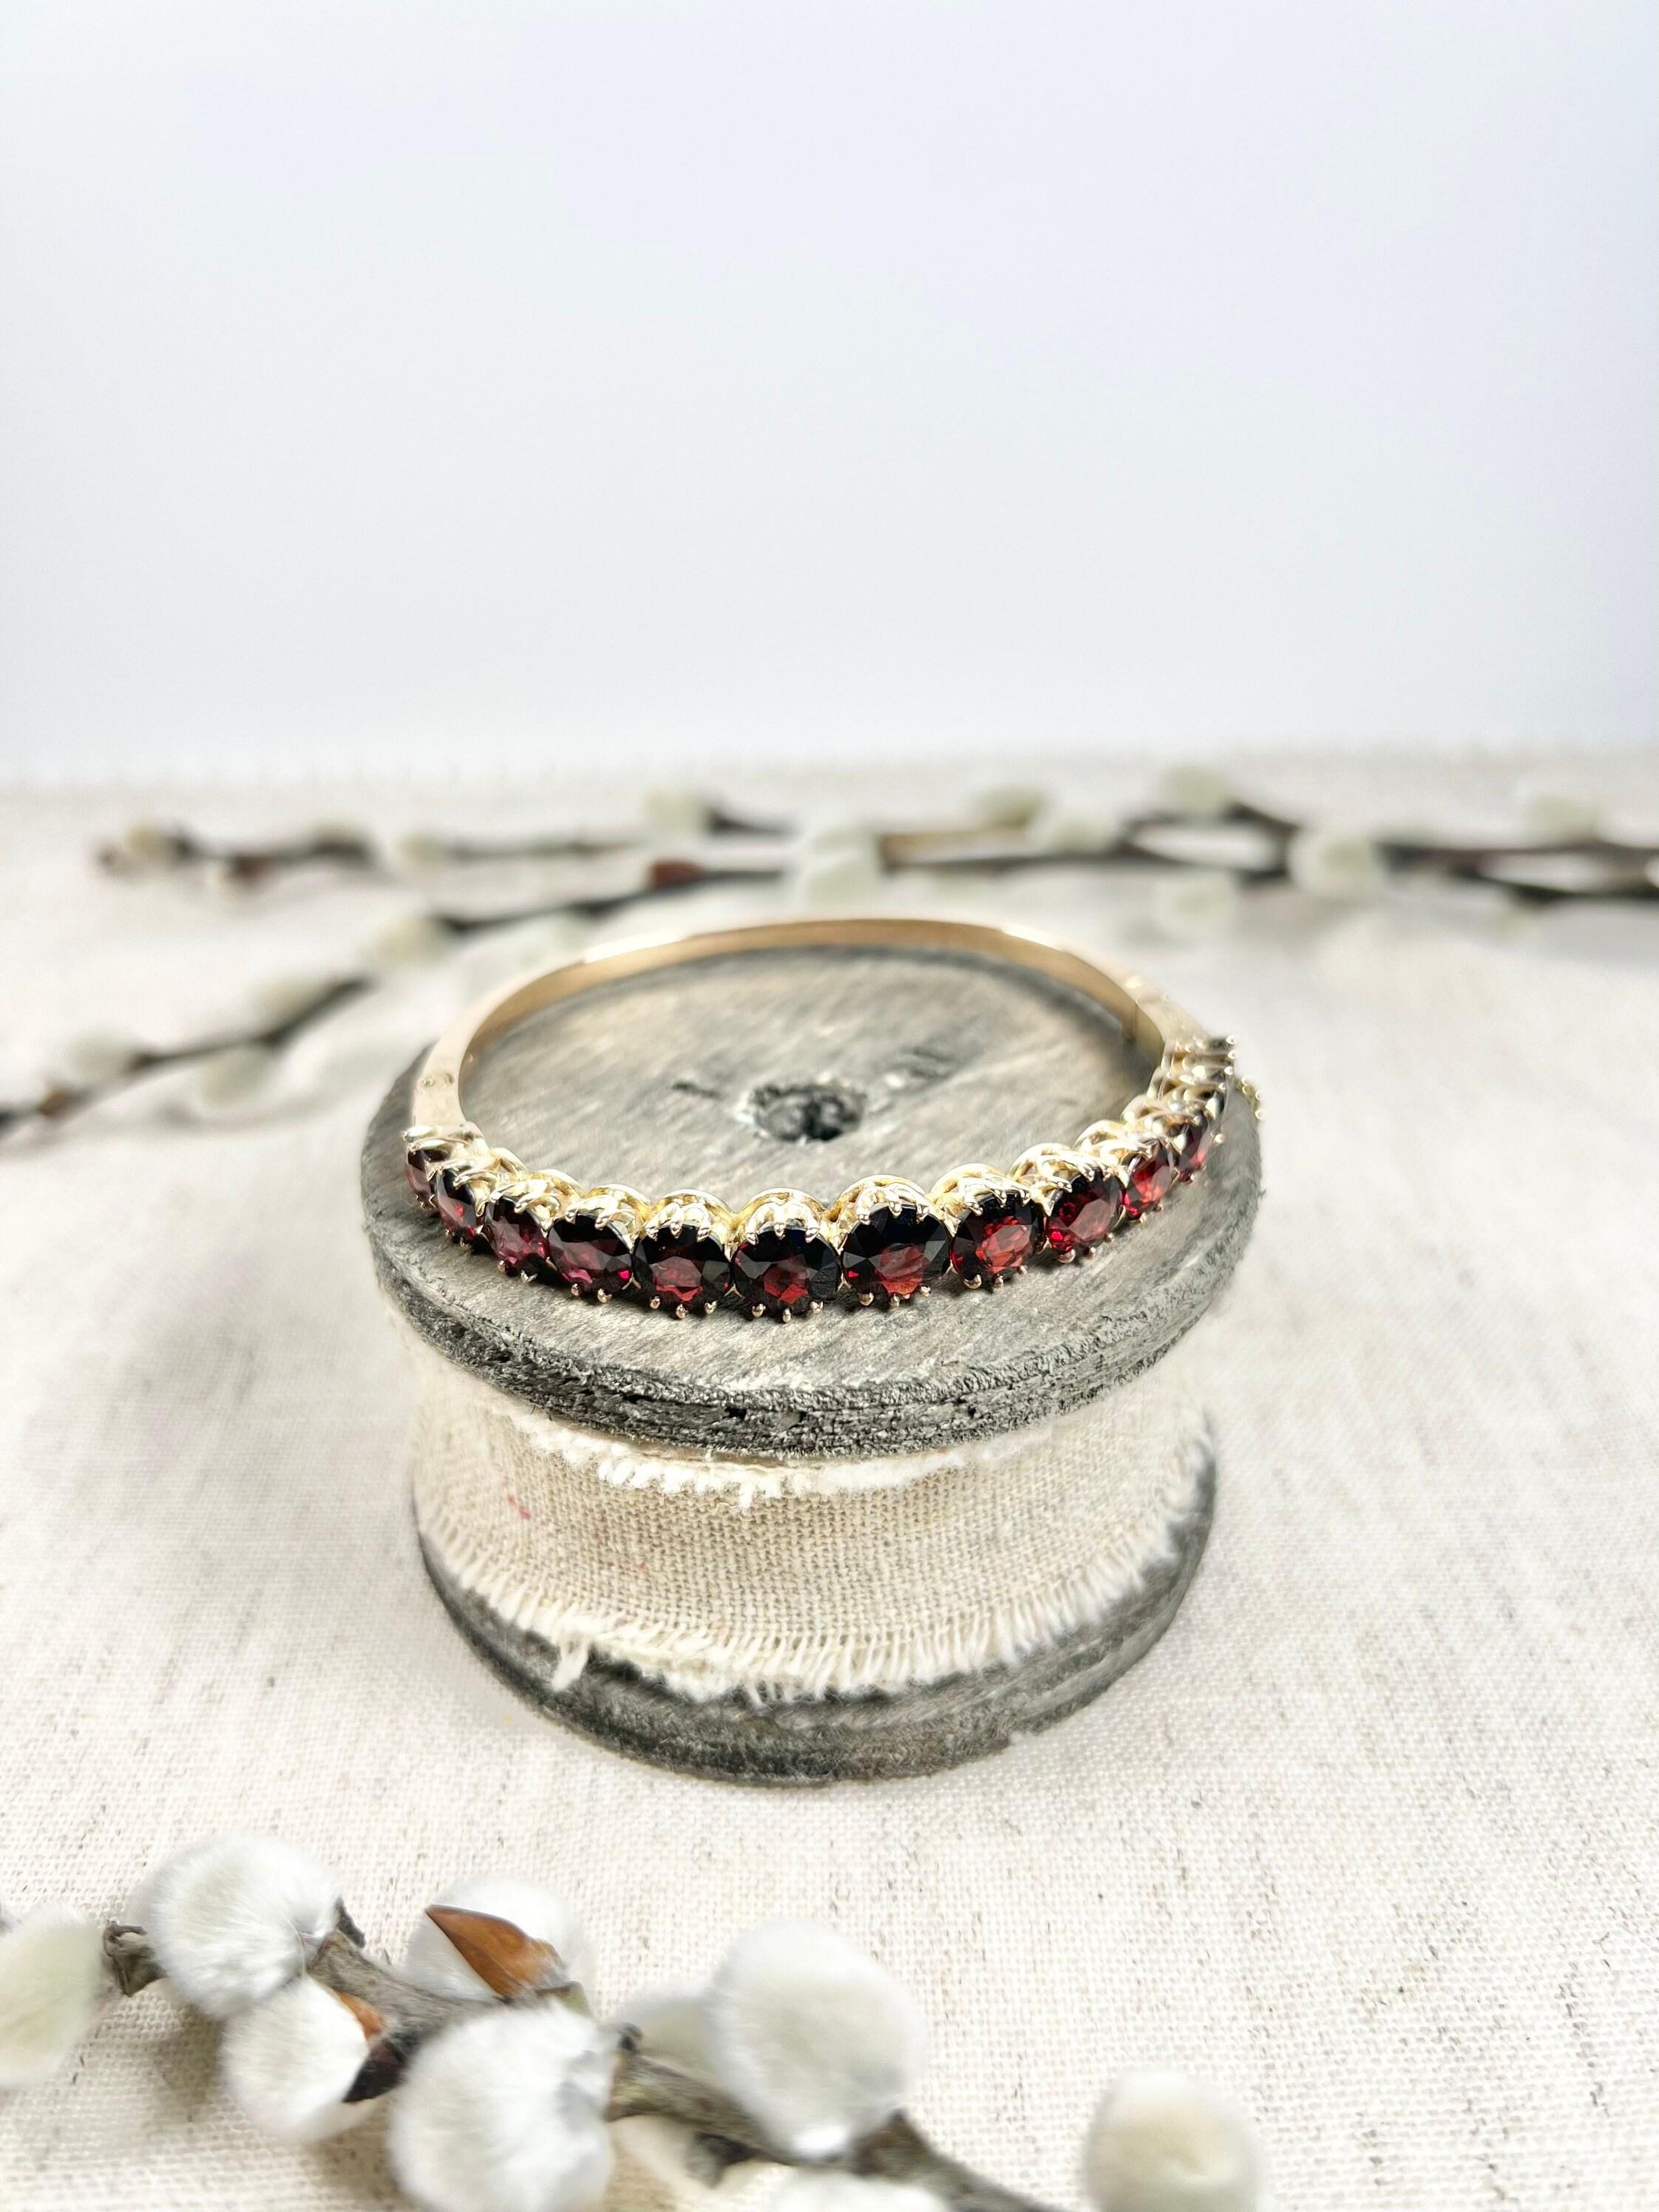 Antique Garnet Bangle 

14ct Gold 

Circa 1900

Fabulous, Edwardian bangle. Set with gorgeous, round, faceted garnet stones. The gems graduate in size from 8-6mm. The shoulders of the bangle have lovely hand carved detailing. The bangle features an